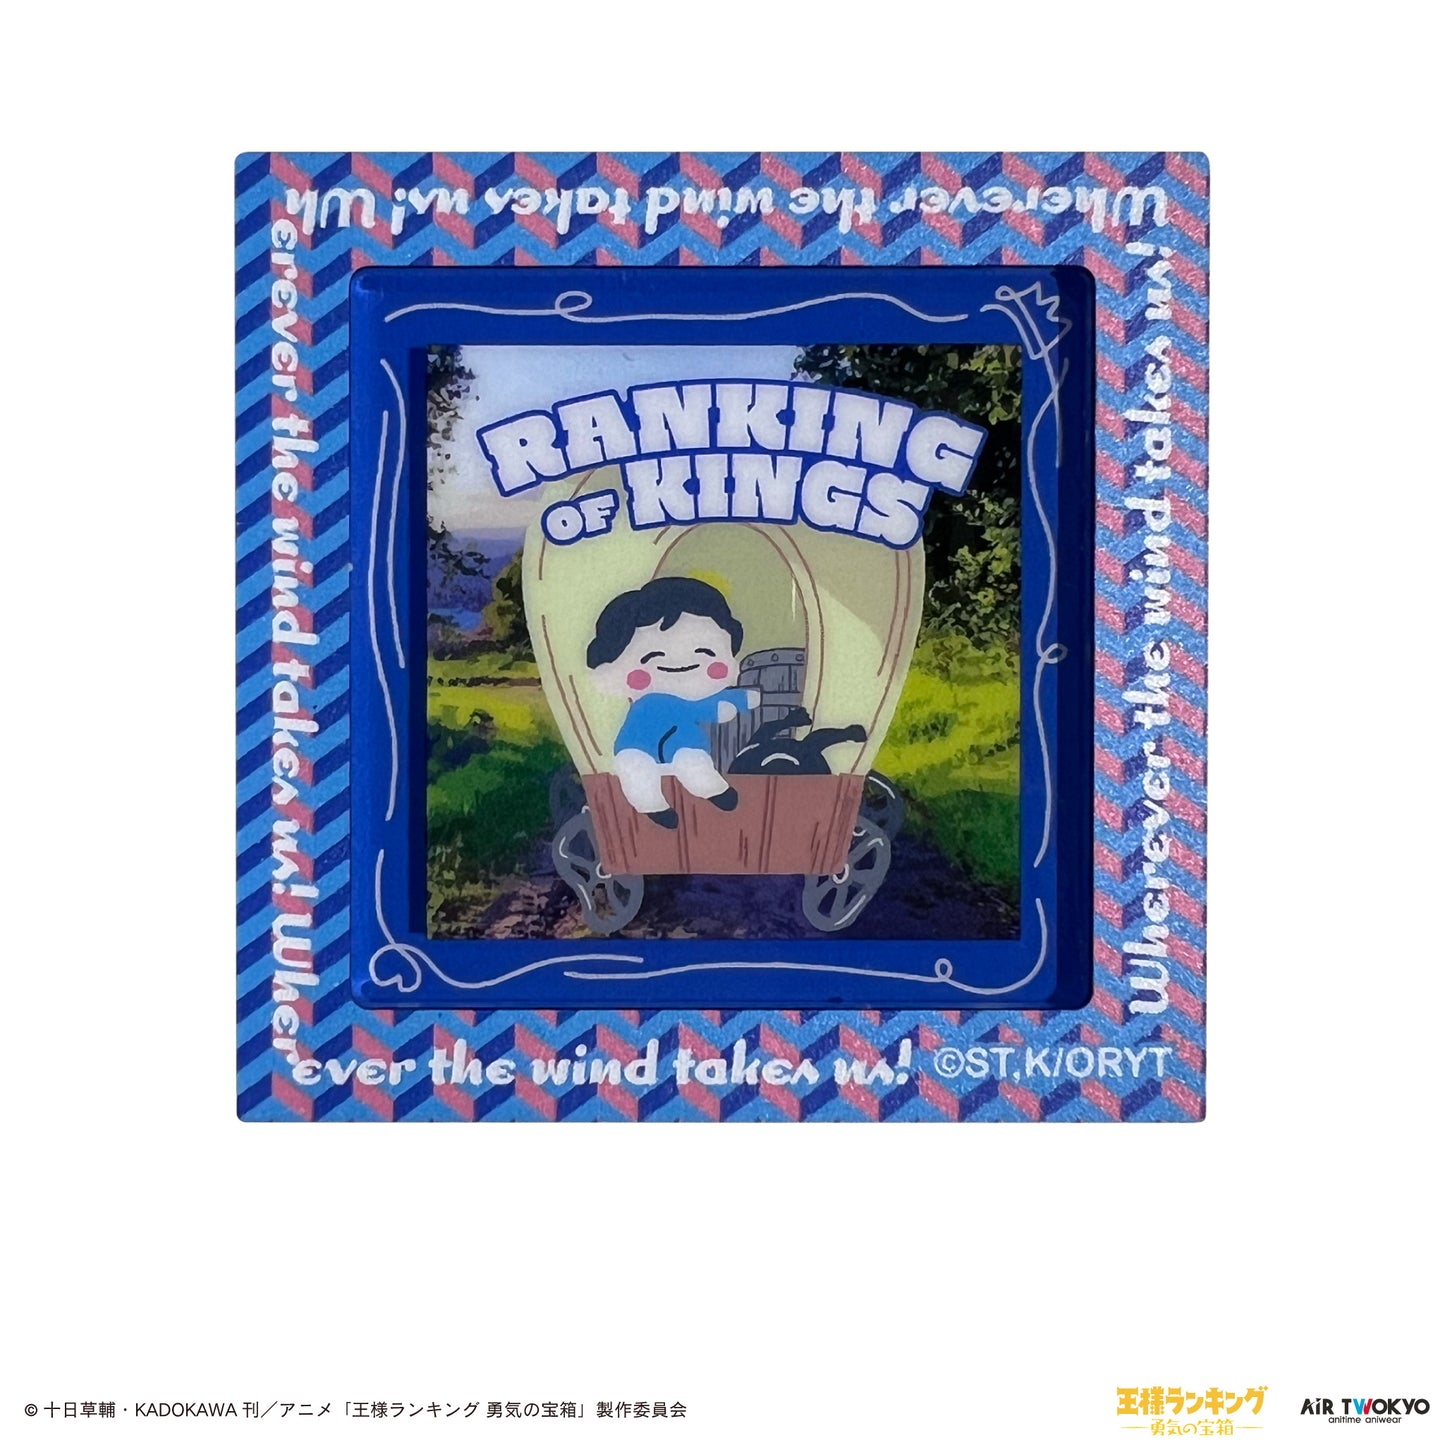 “Ranking of Kings: The Treasure Chest of Courage”scene illustration picture frame magnet